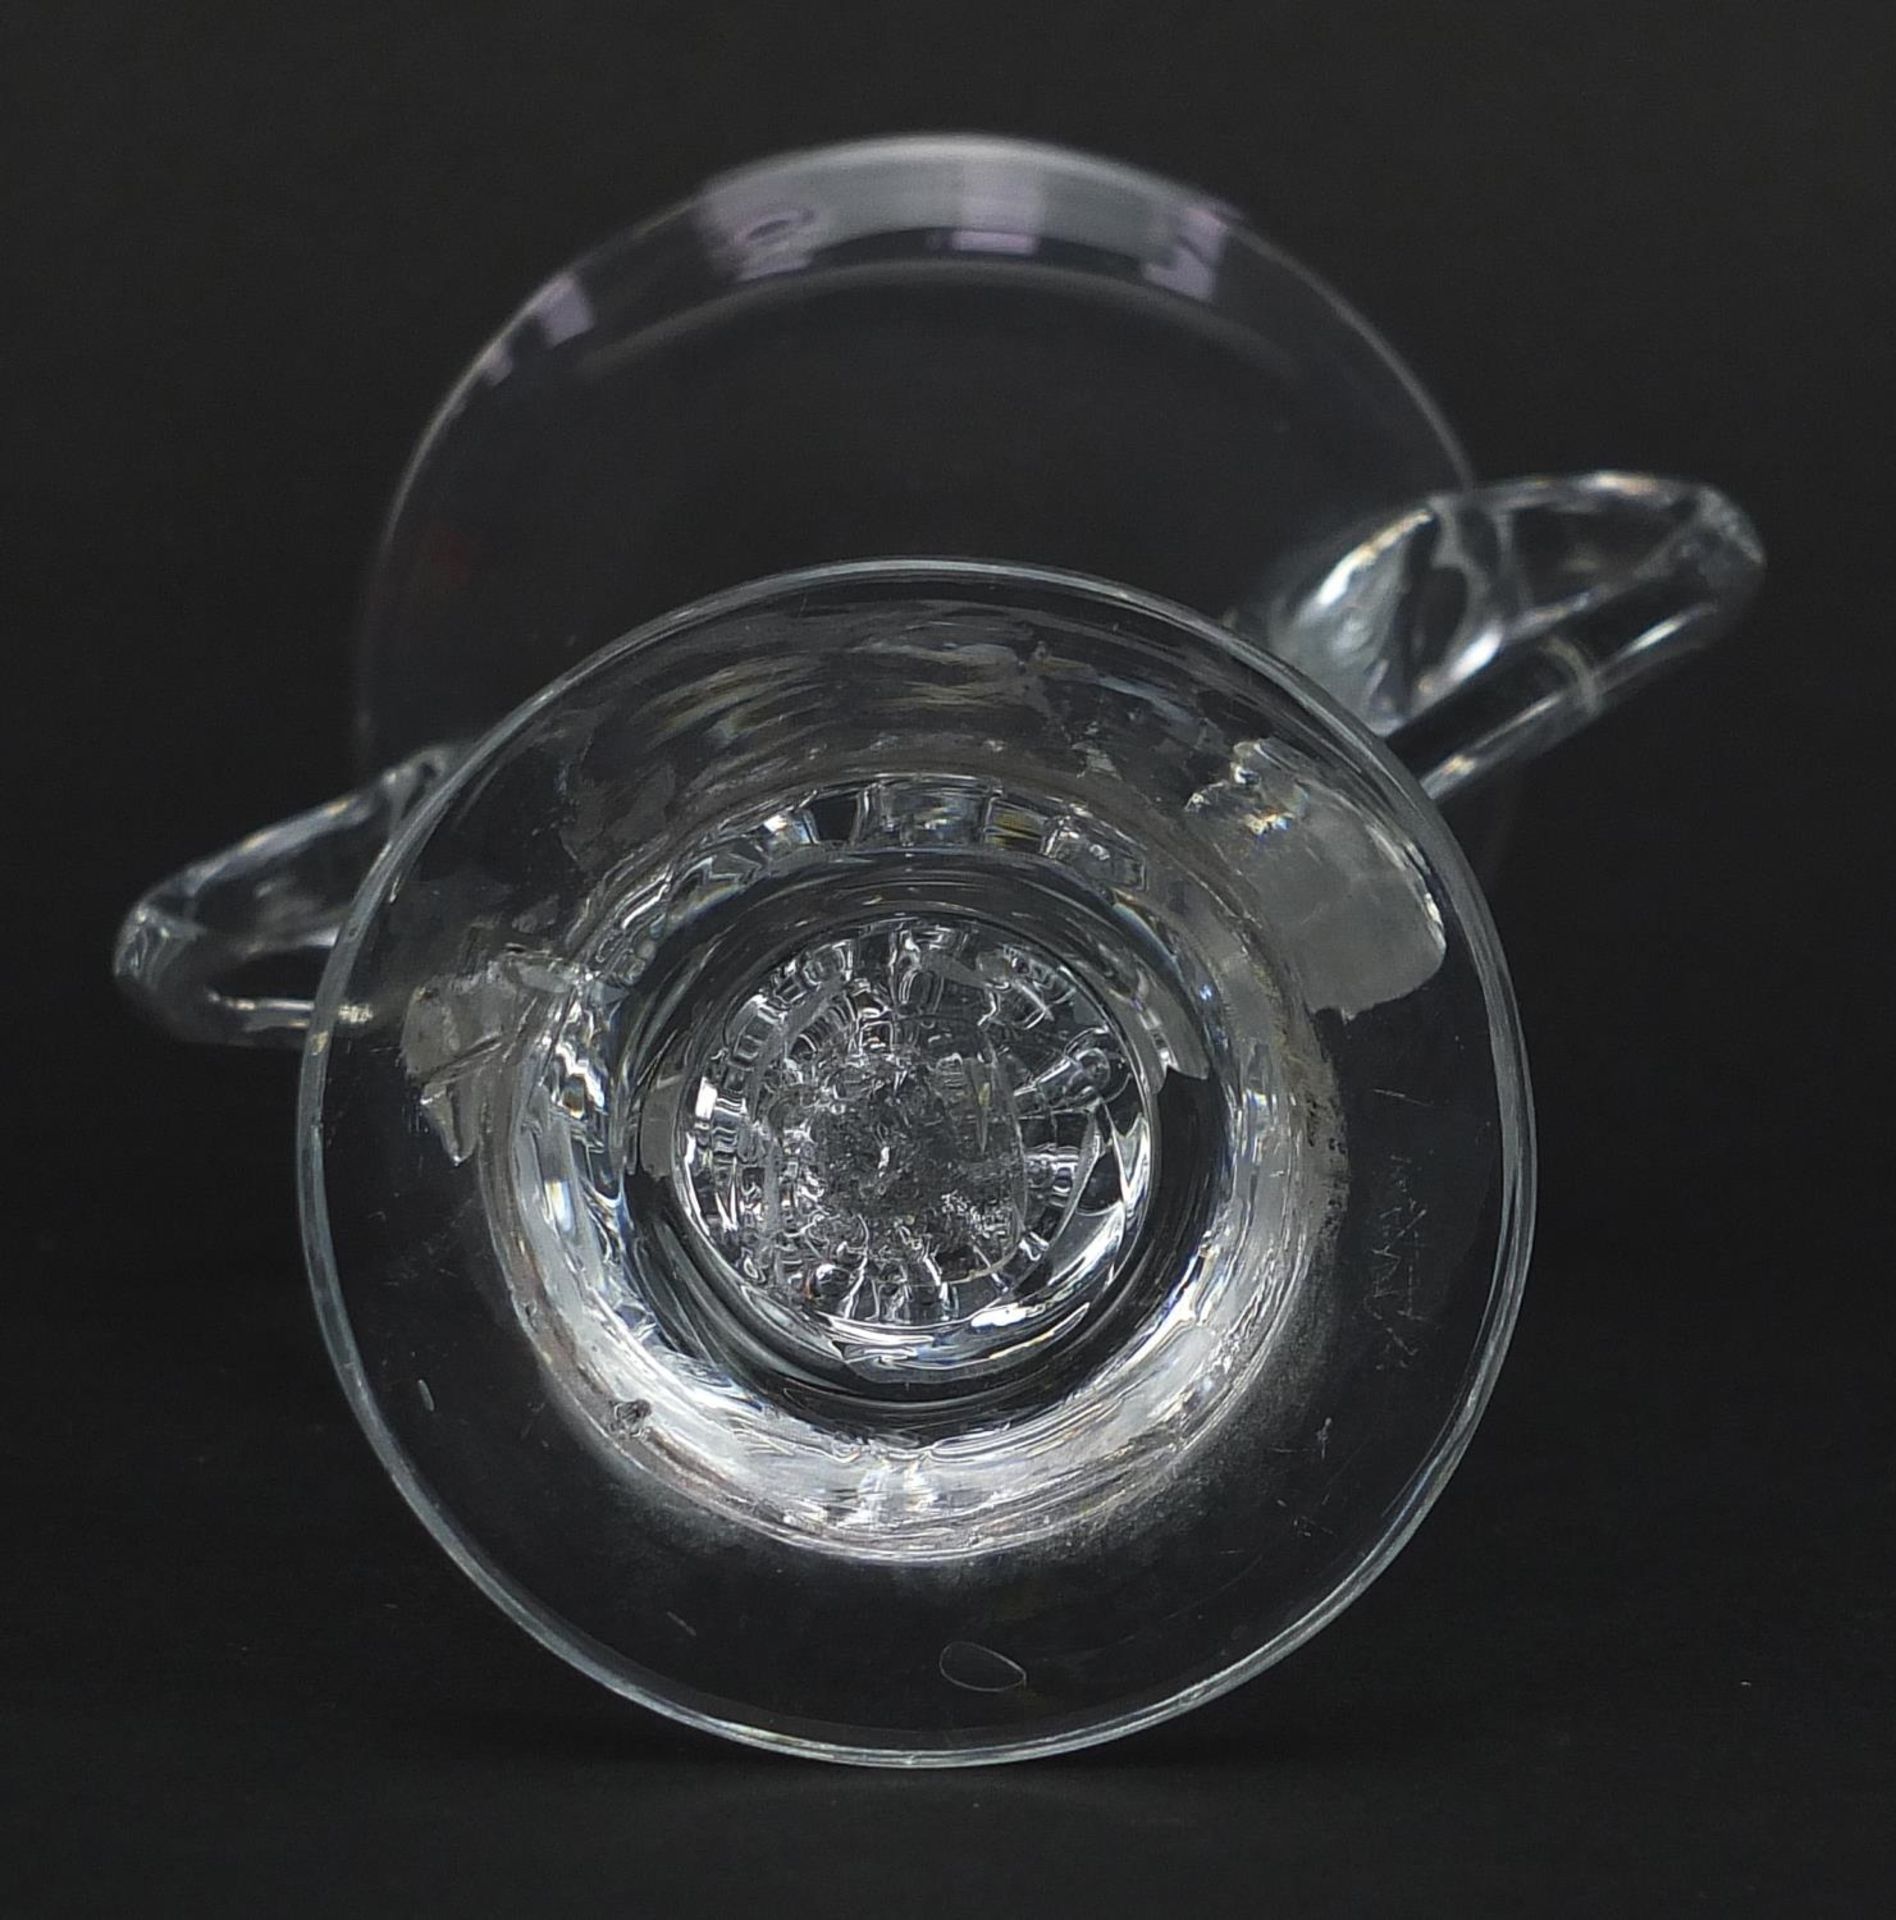 18th century jelly glass with twin handles, 11.5cm high - Image 3 of 3